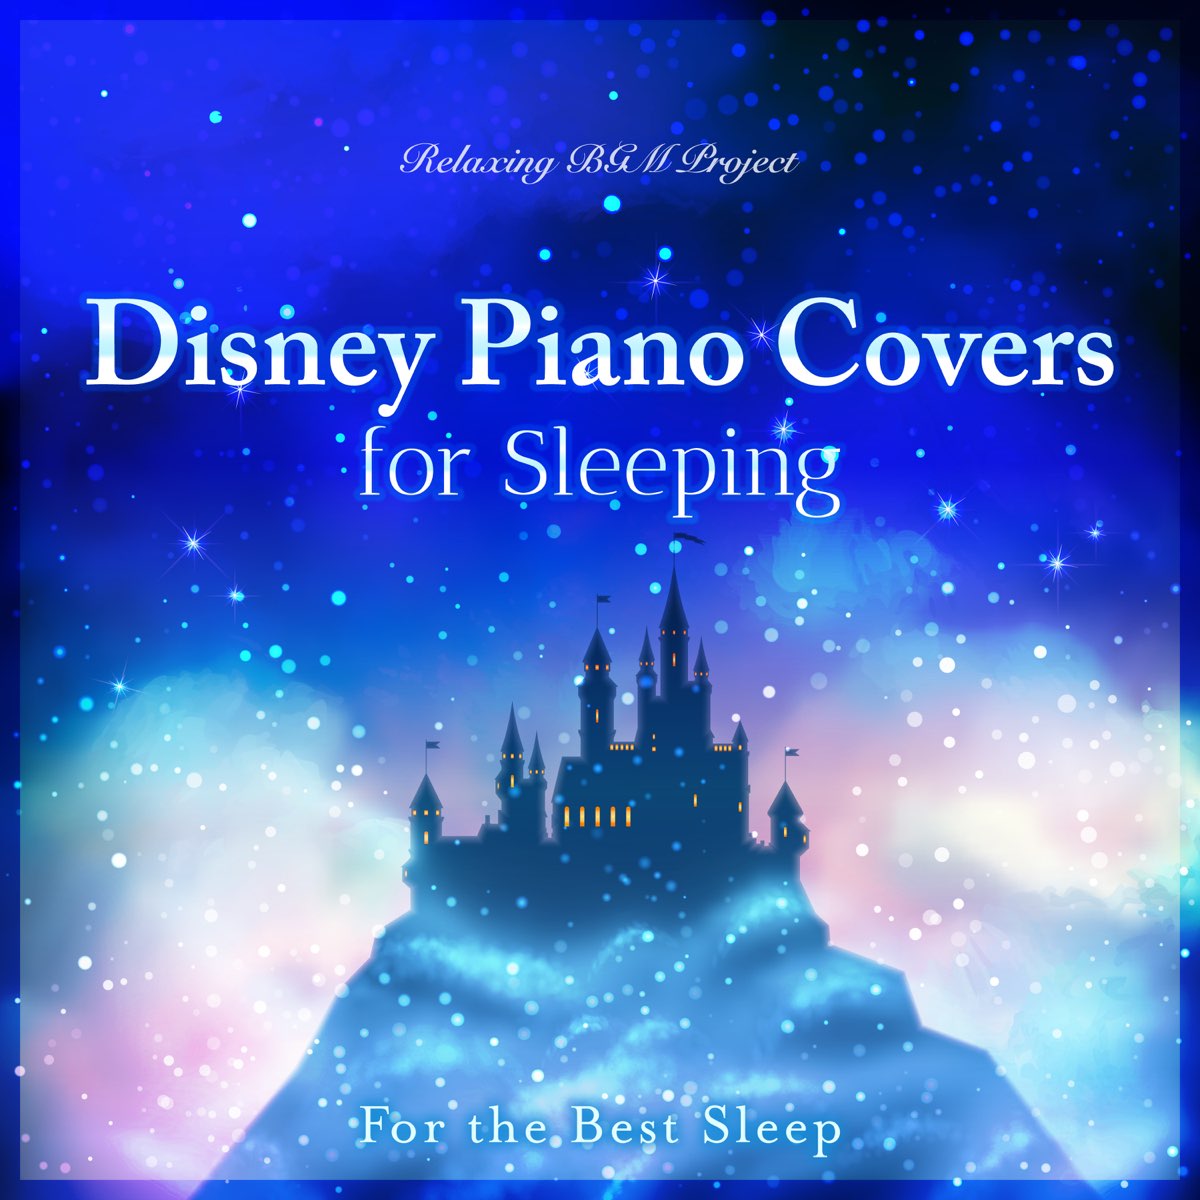 Disney Piano Covers for Sleeping ~ For the Best Sleep ~ by Relaxing BGM  Project on Apple Music